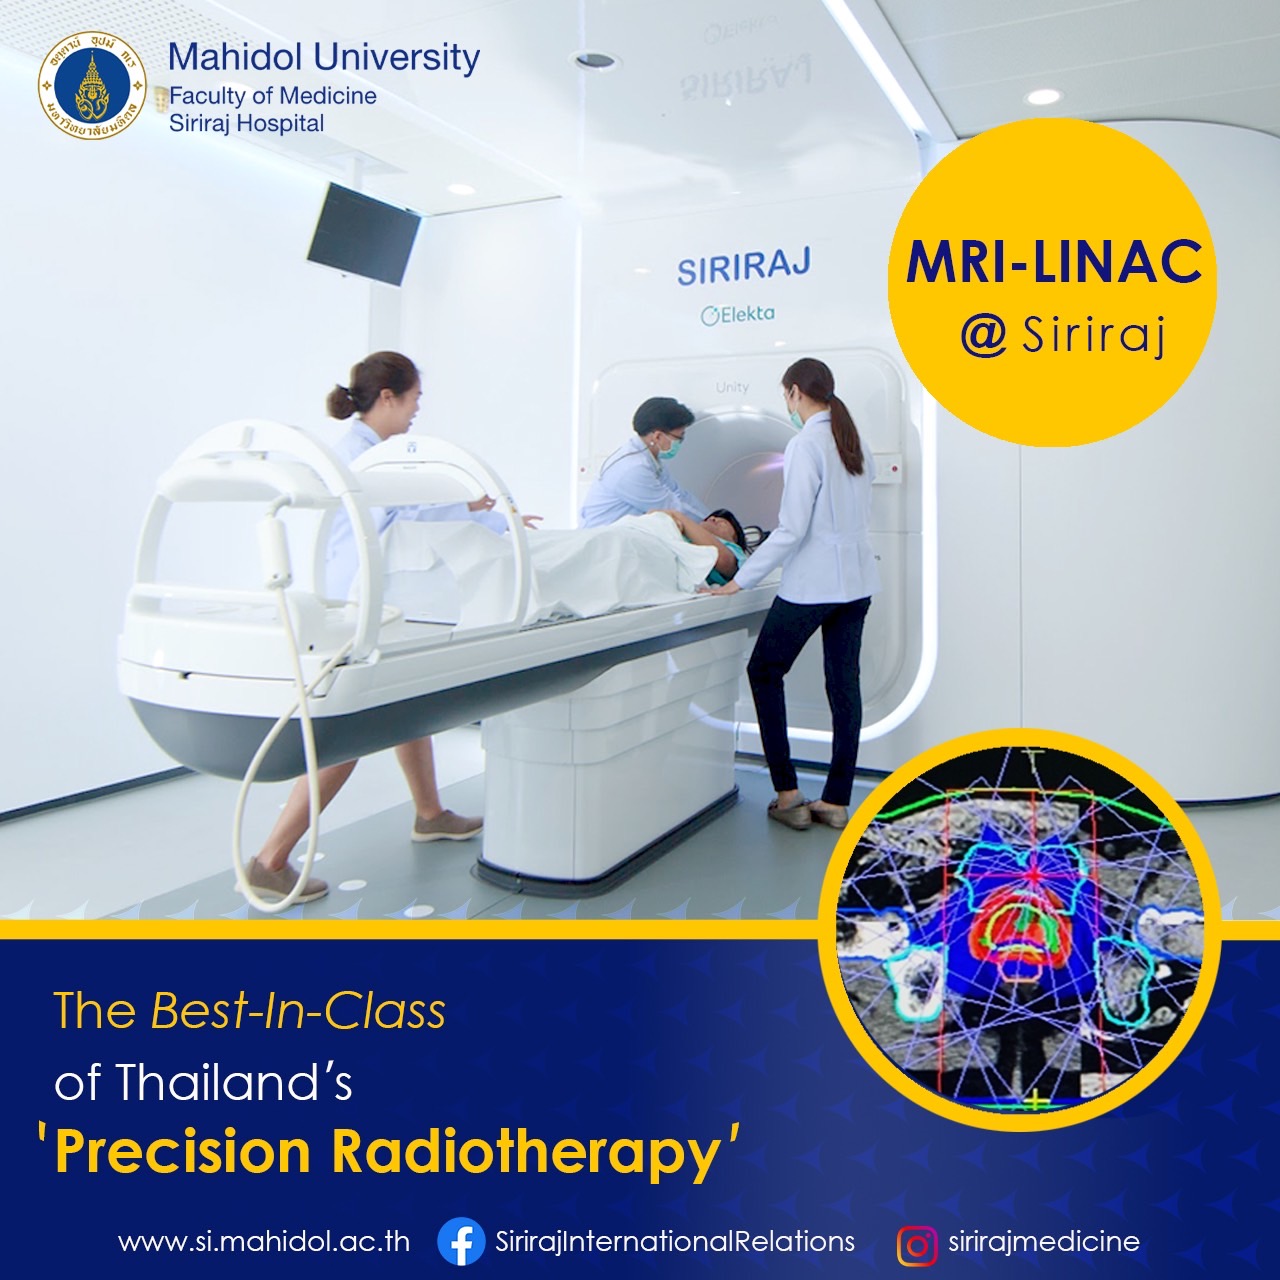 The best-in-class of Thailand’s ‘Precision Radiotherapy